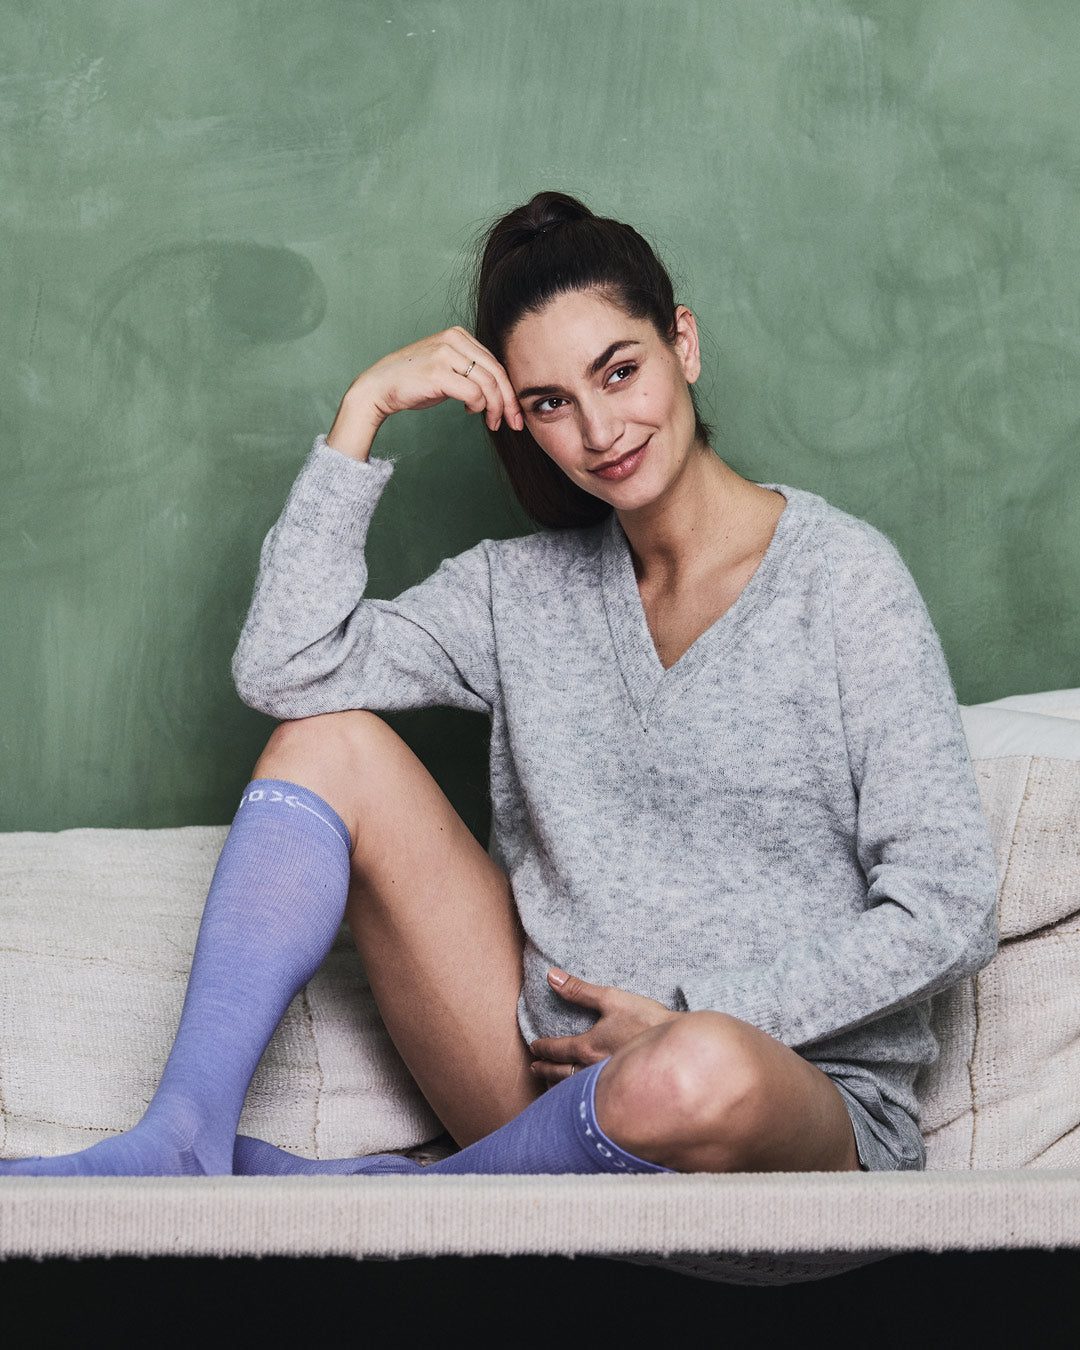 Let's Talk about Compression Stockings: What are They and How do